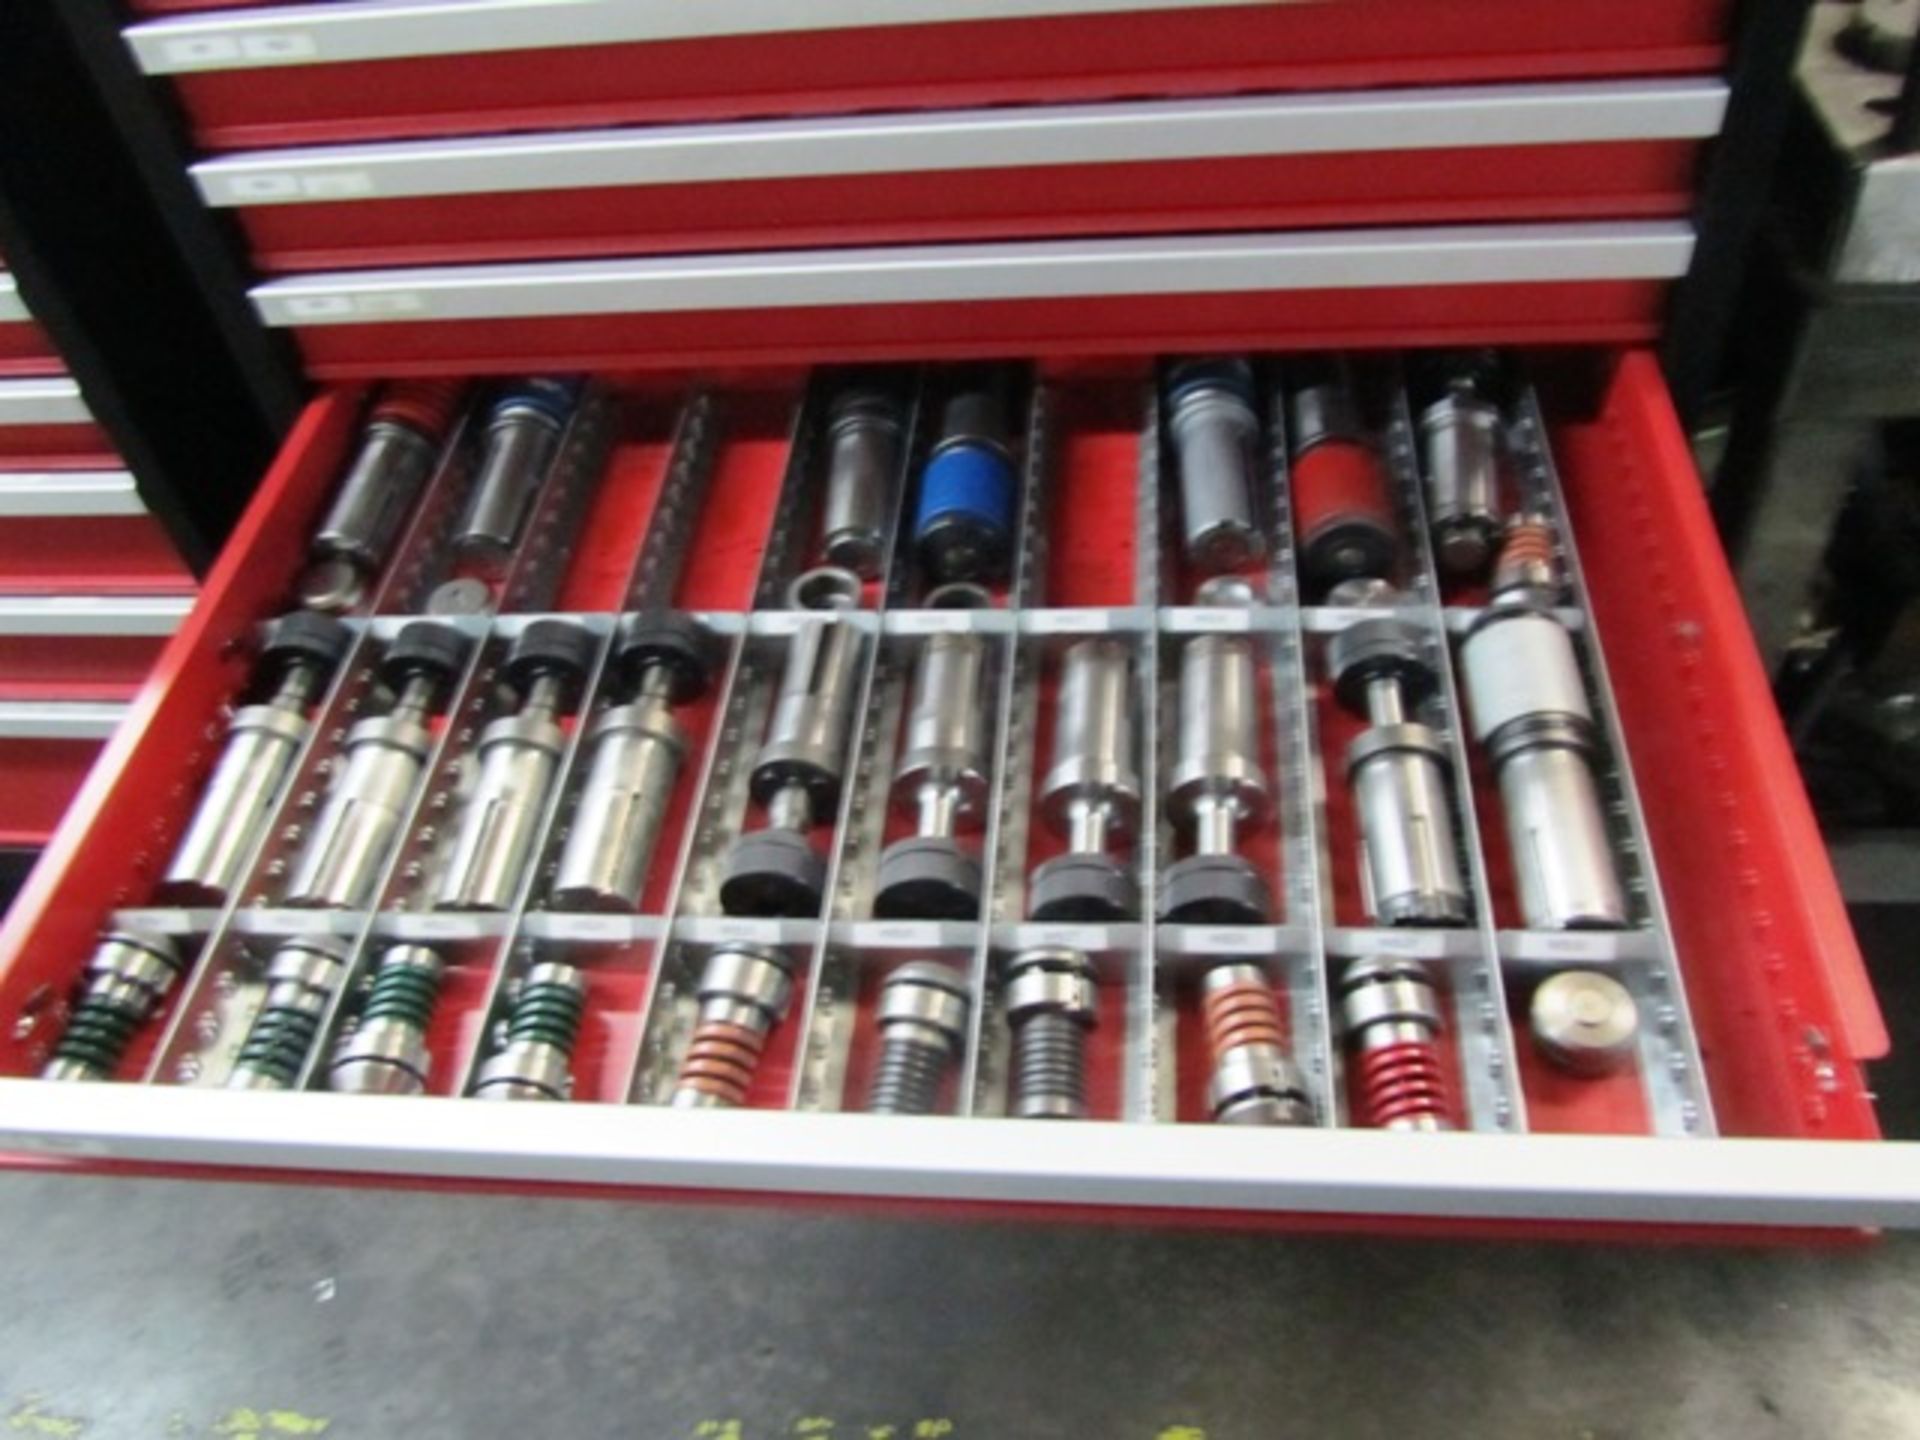 Amada 8 Drawer Portable Tool Cabinet with Turret Punches & Dies - Image 6 of 7